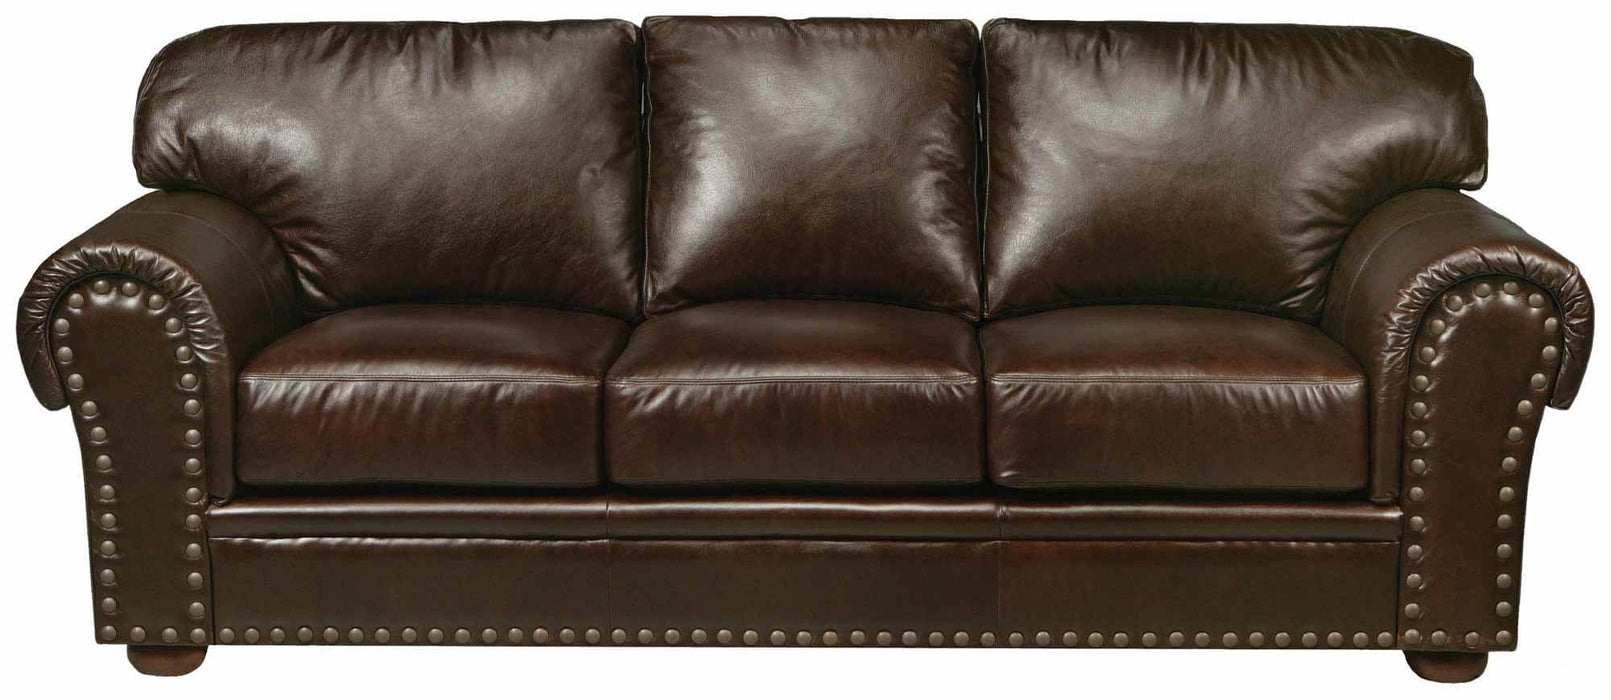 Beaumont Leather Queen Sofa Sleeper | American Style | Wellington's Fine Leather Furniture